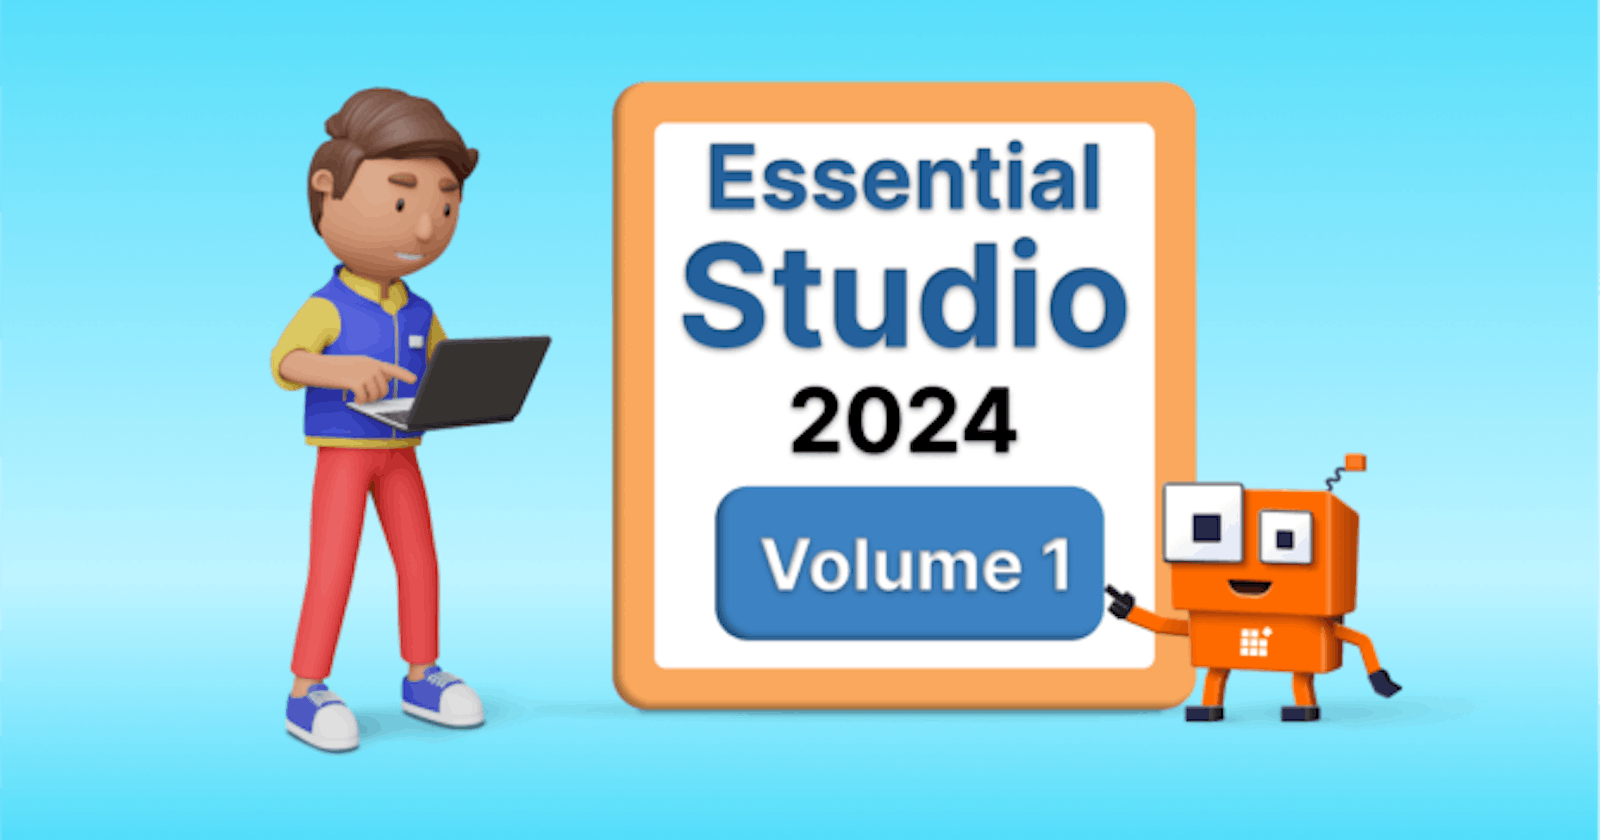 Syncfusion Essential Studio 2024 Volume 1 Is Here!